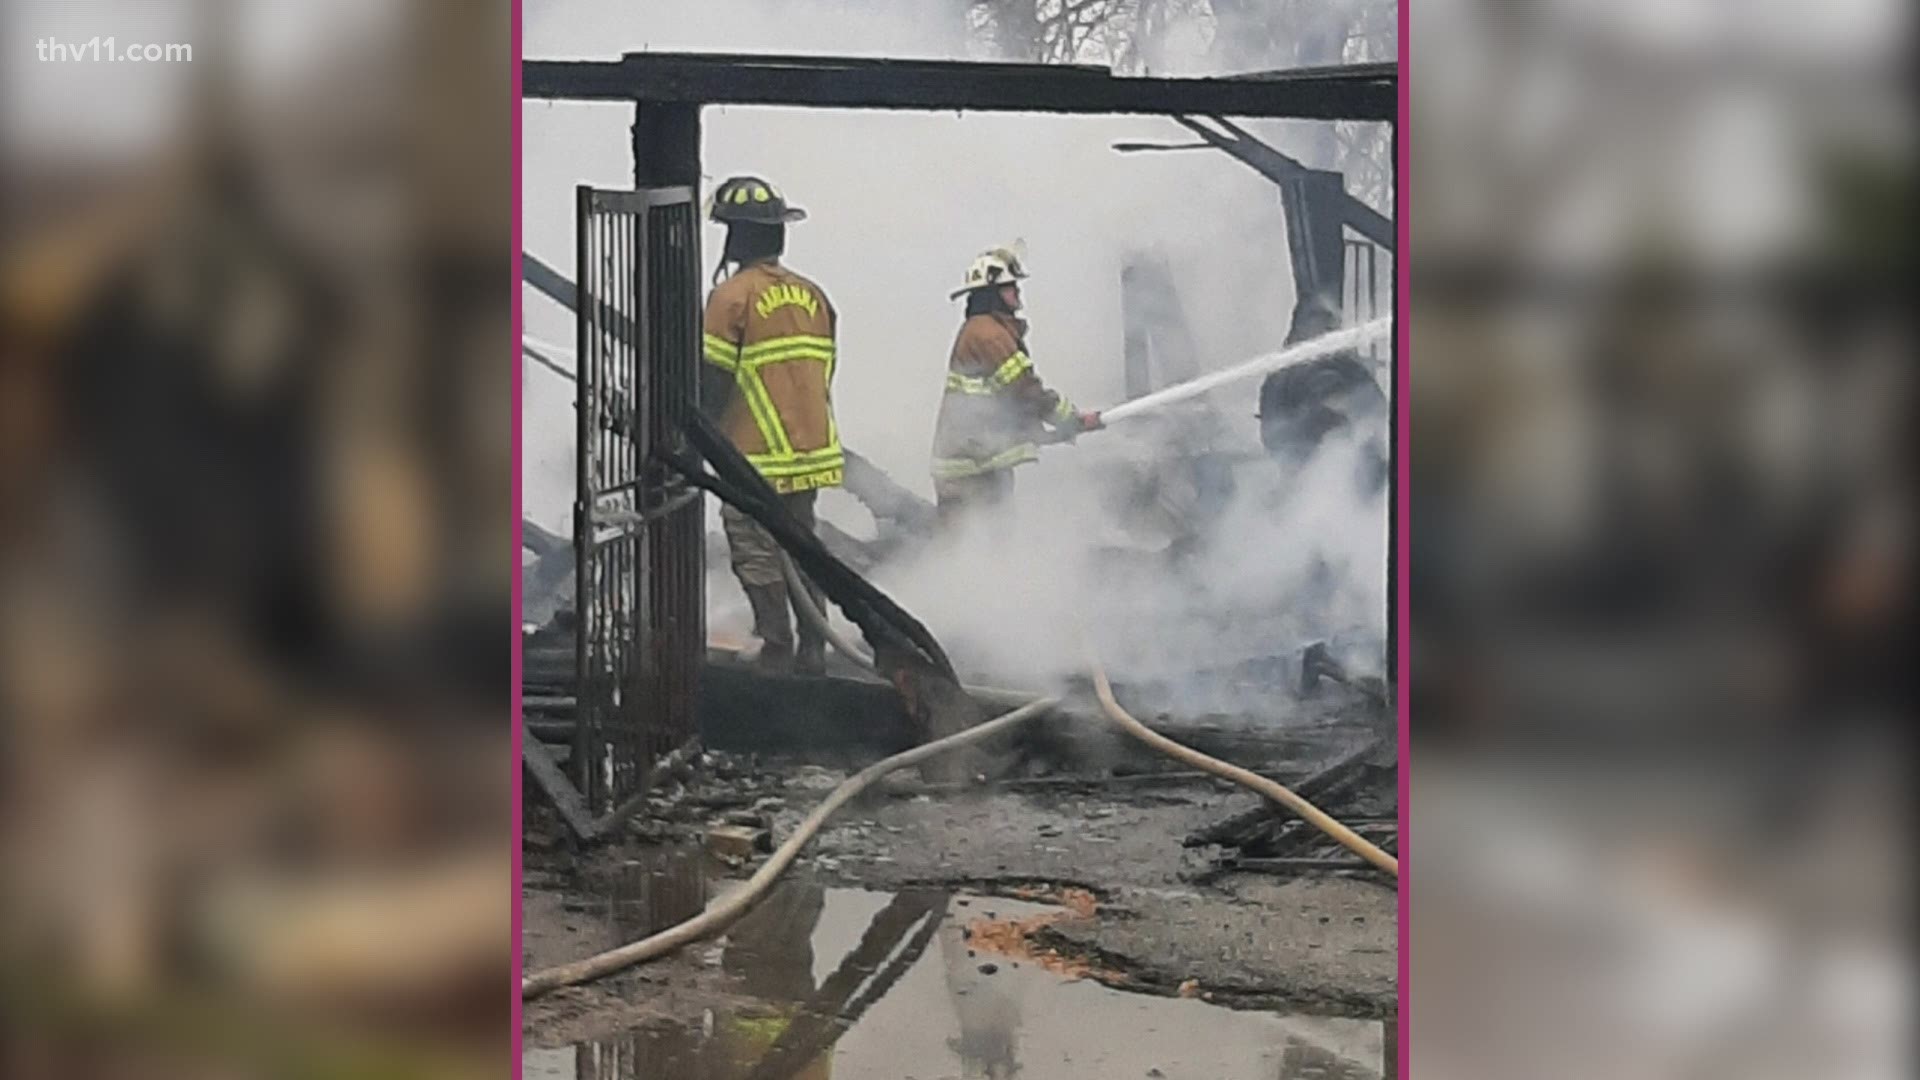 The Venture Center, a nonprofit organization, is helping to raise money after Jones BBQ in Mariana was heavily destroyed in a fire on Sunday, Feb. 28.